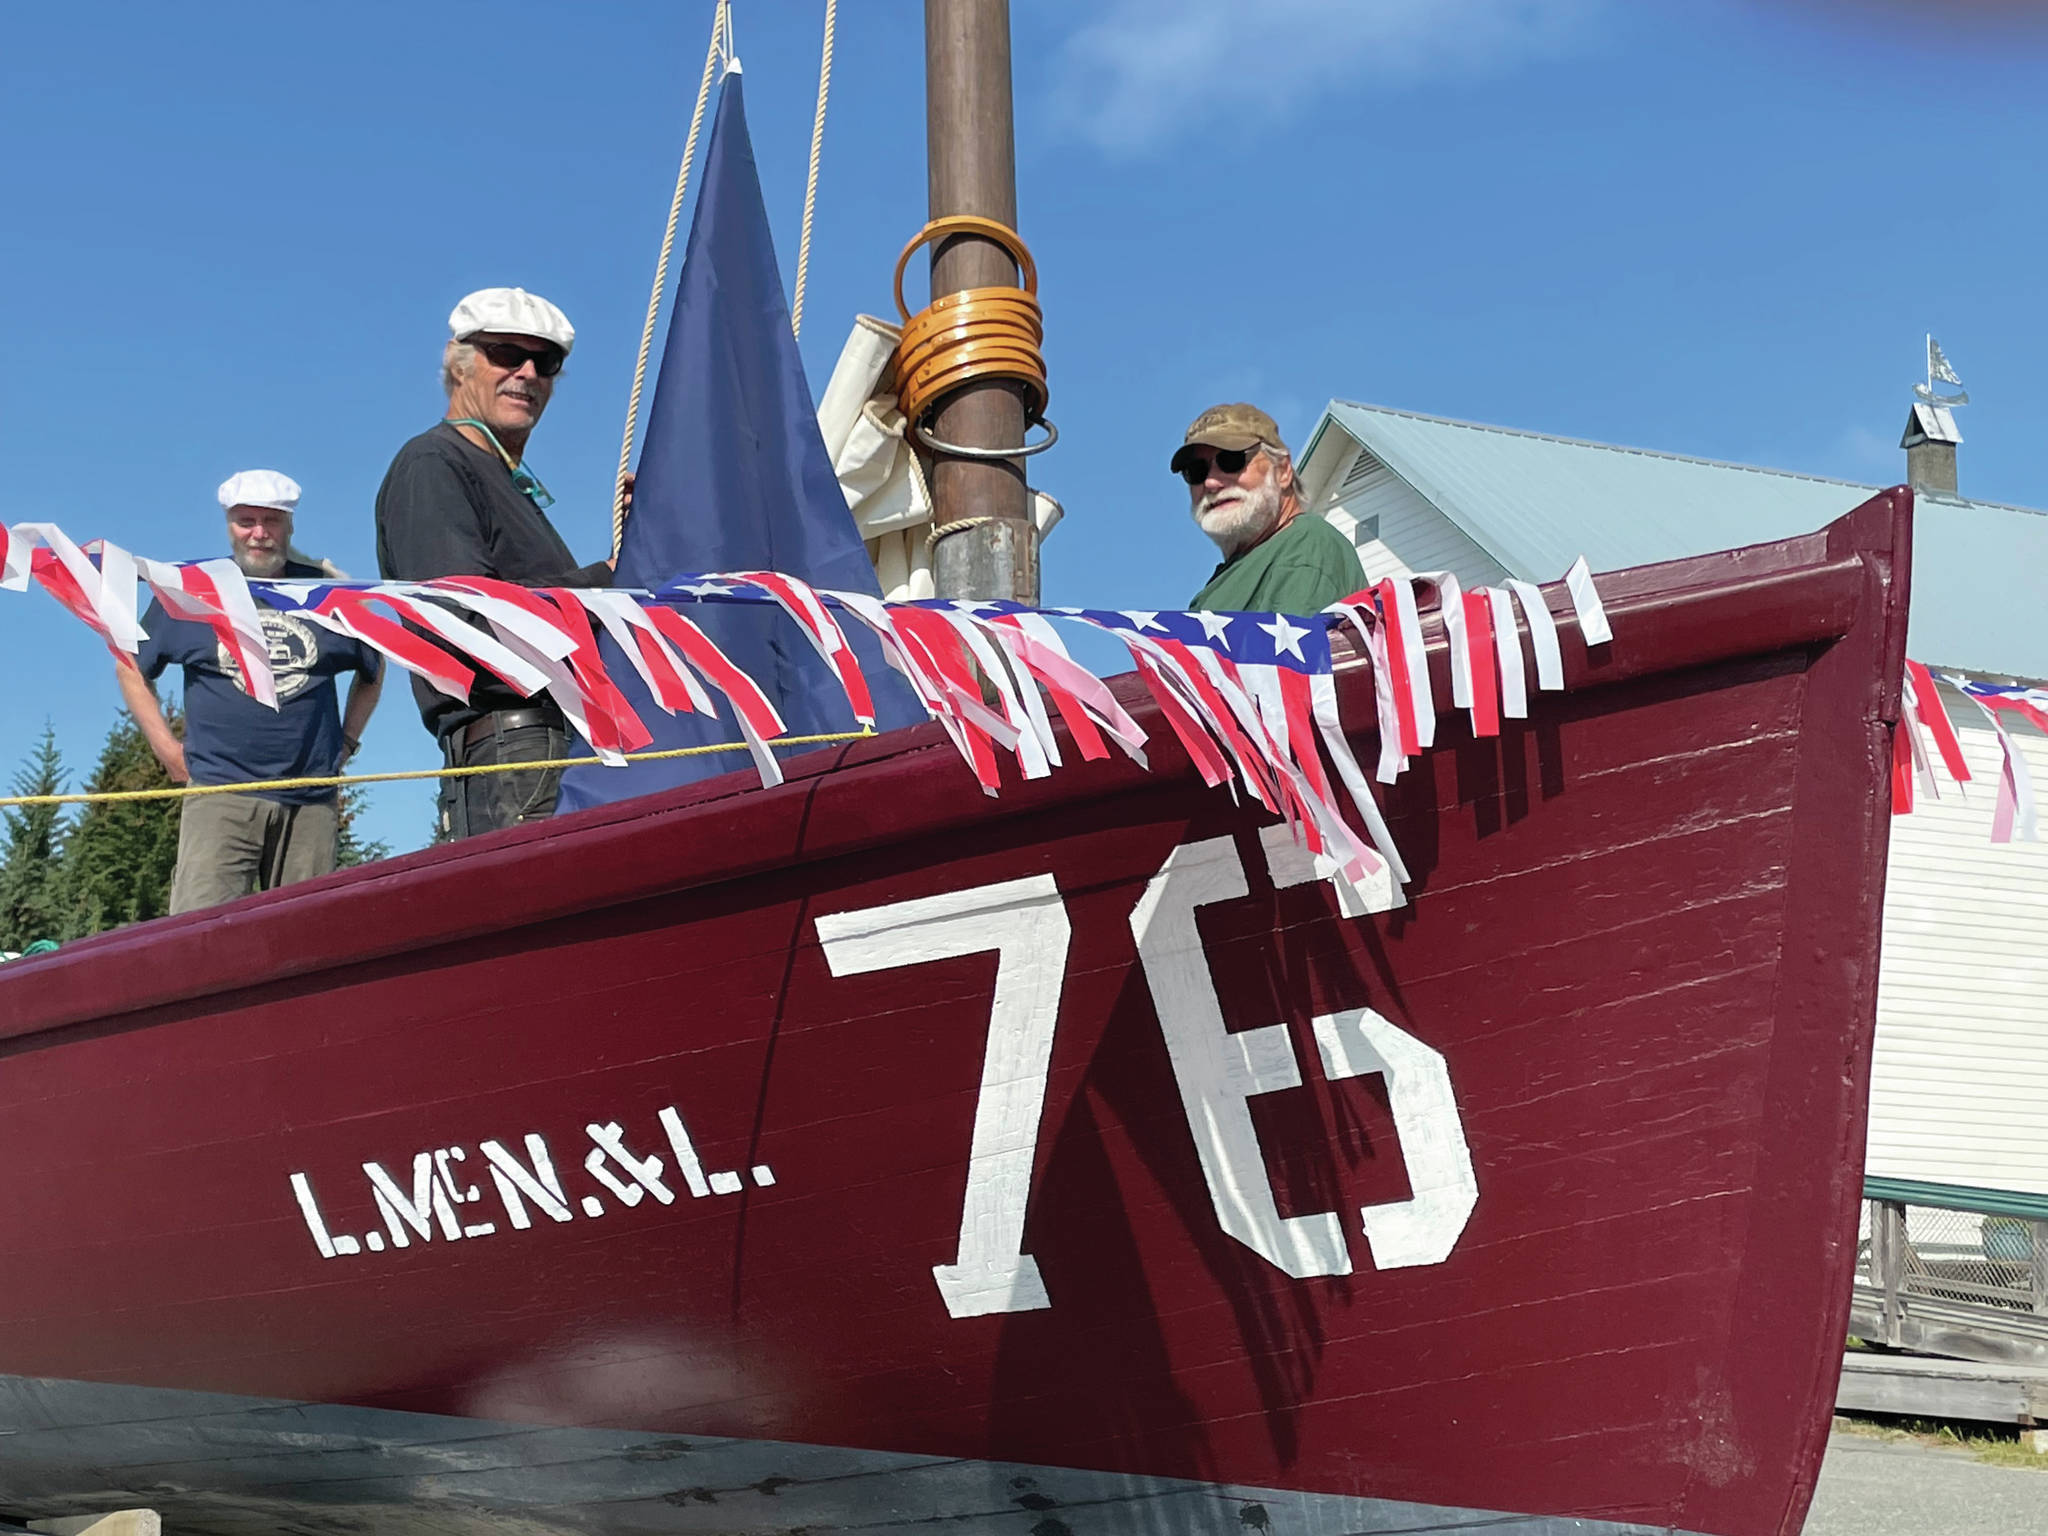 Dave Collette-Paule, left, Dave Seaman, center, and Mike Kennedy, right ready No. 76 for Homer’s Fourth of July Parade on Sunday, July 4, 2021, in Homer, Alaska. (Photo by McKibben Jackinsky)